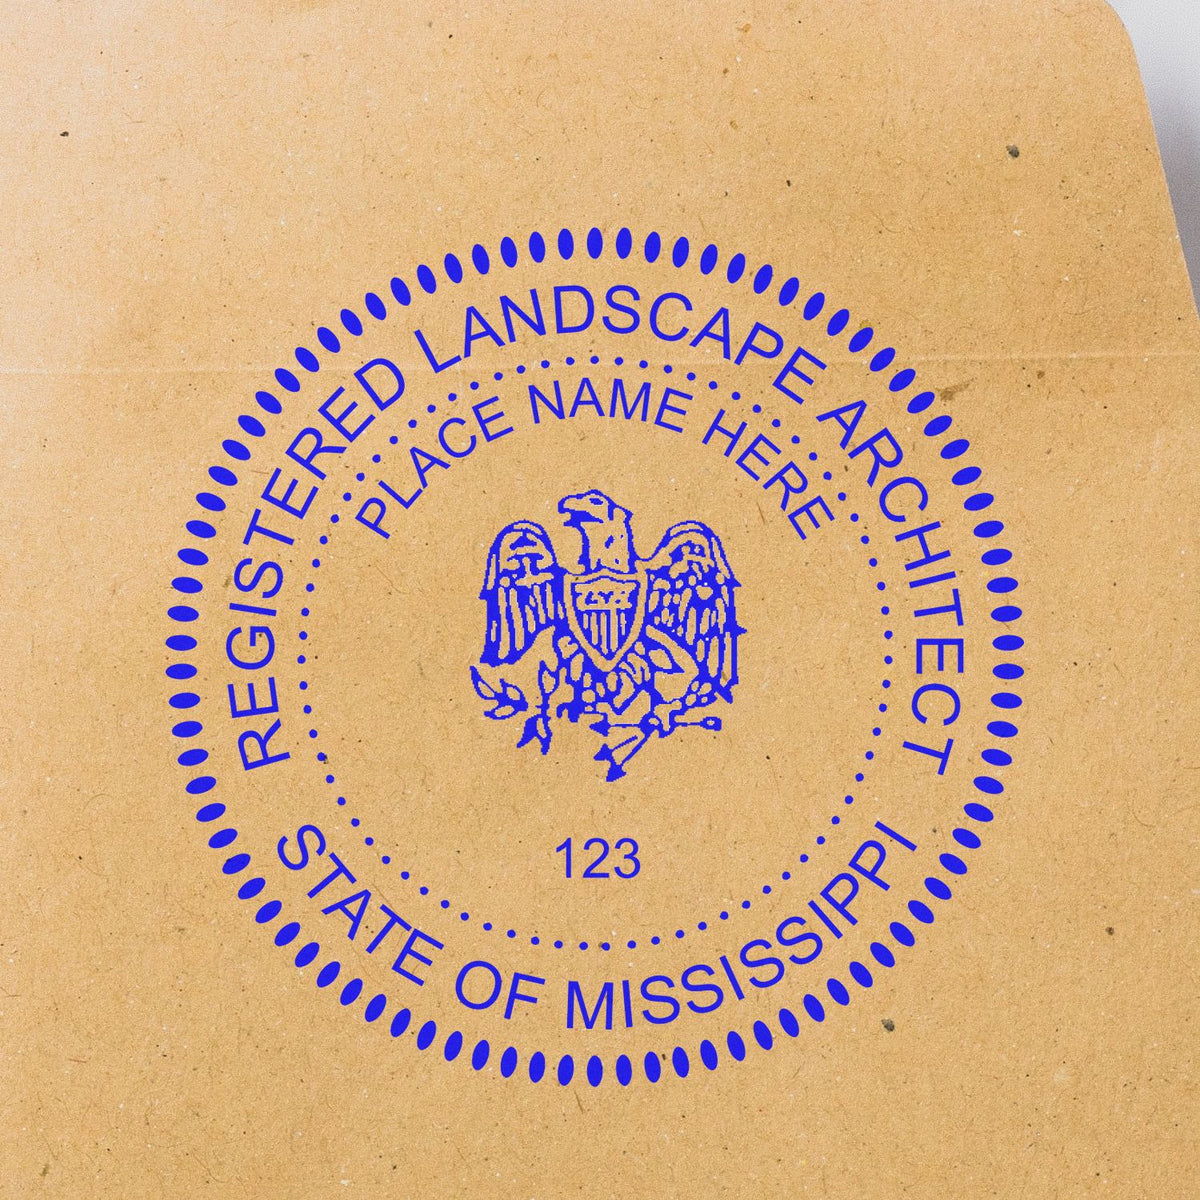 The Slim Pre-Inked Mississippi Landscape Architect Seal Stamp stamp impression comes to life with a crisp, detailed photo on paper - showcasing true professional quality.